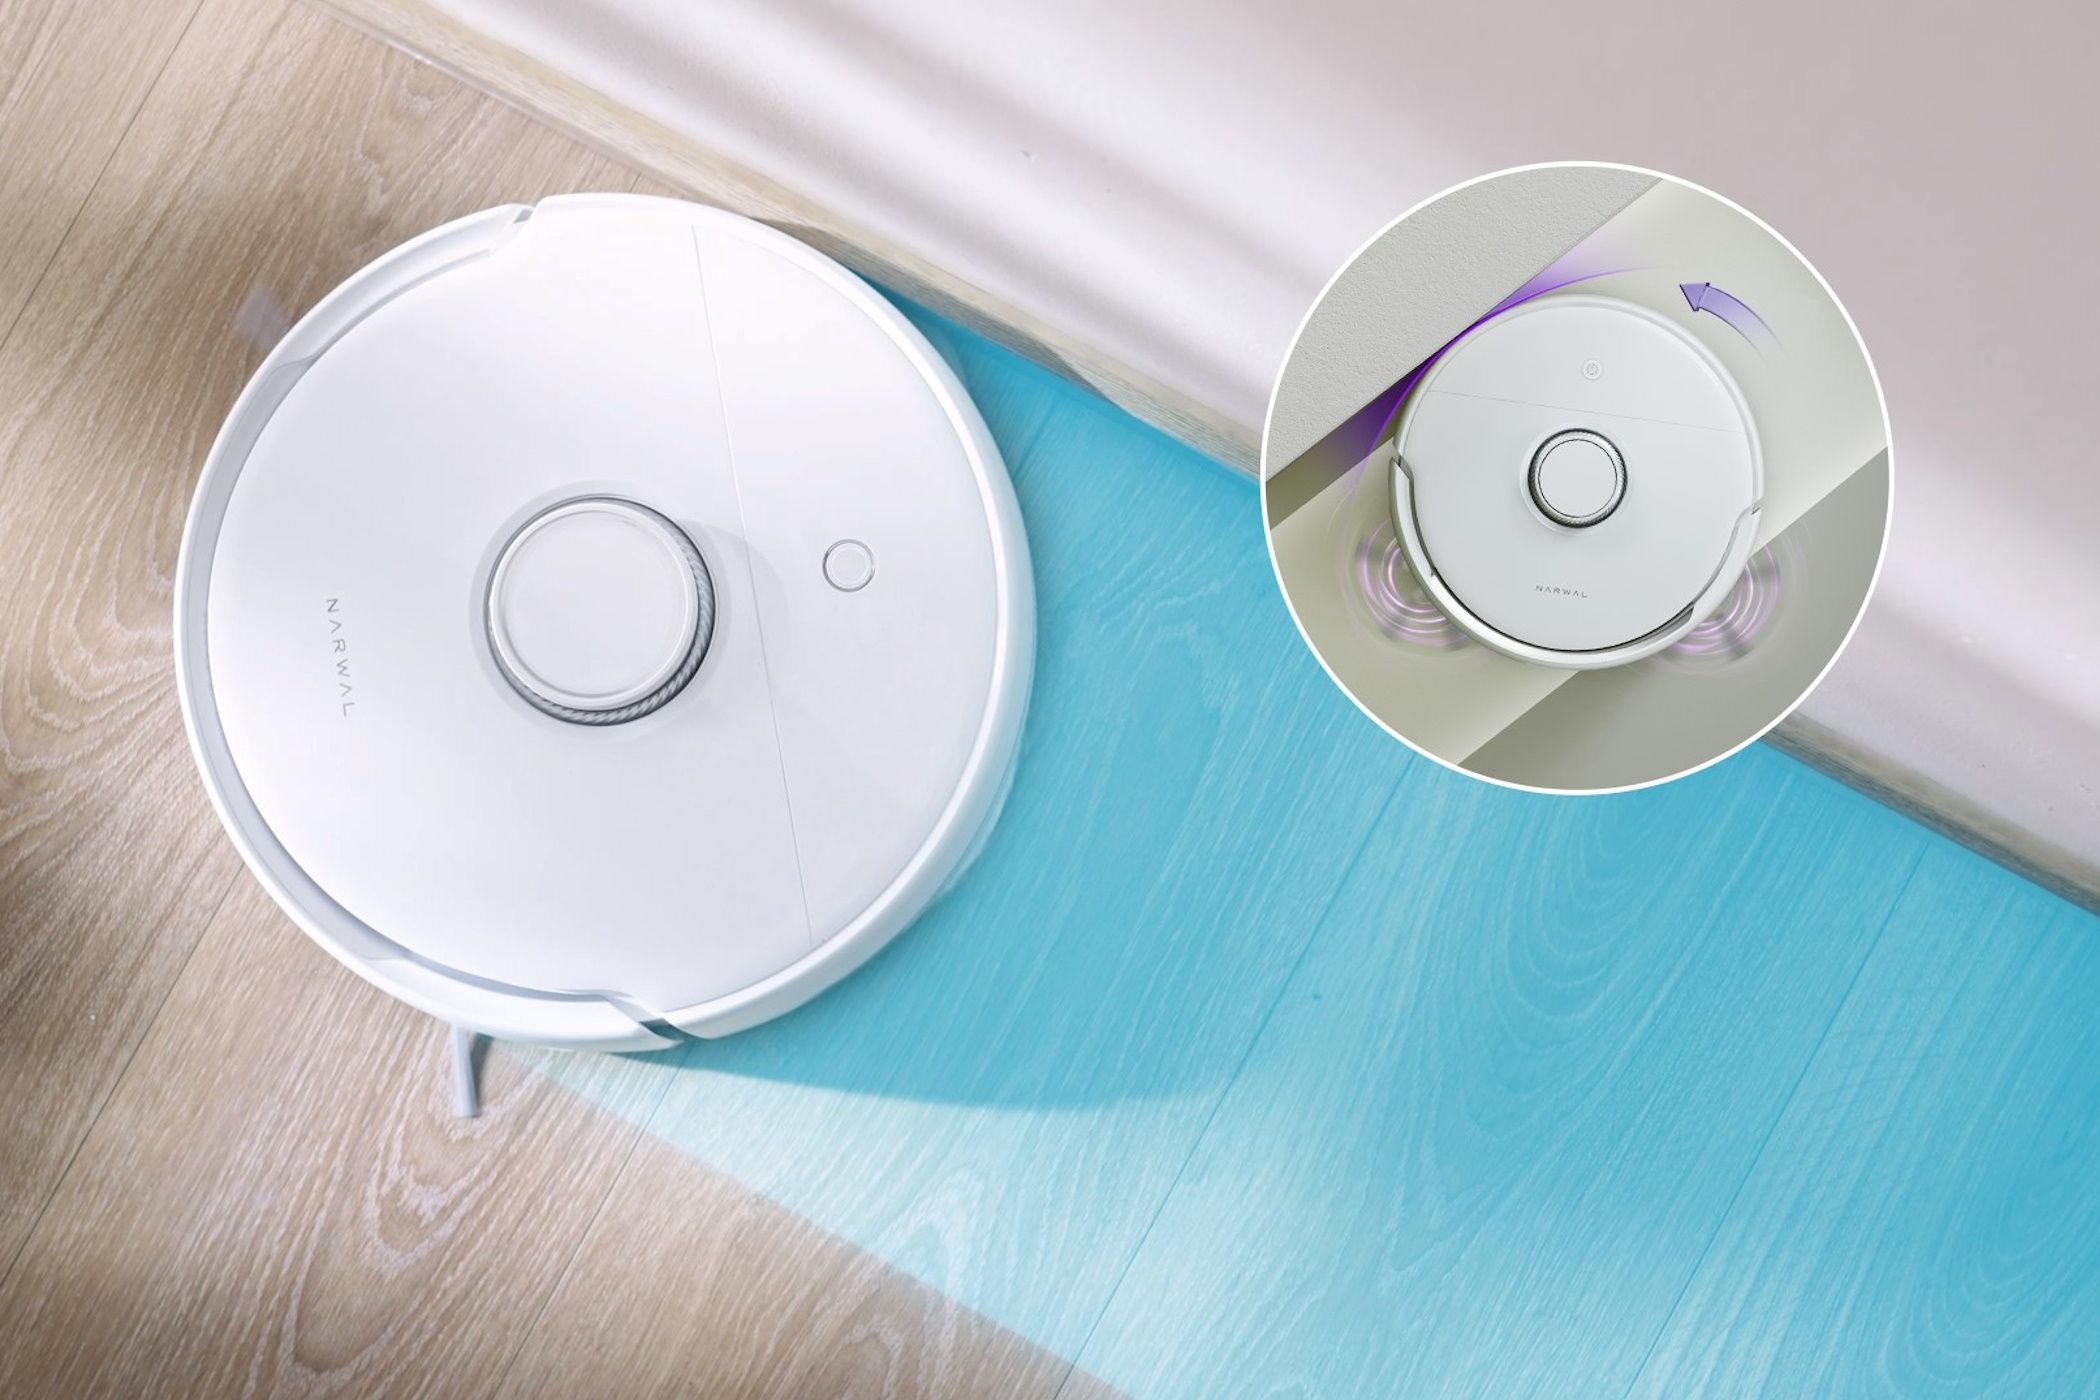 Narwal Freo robot vacuum is the first with AI DirtSense technology